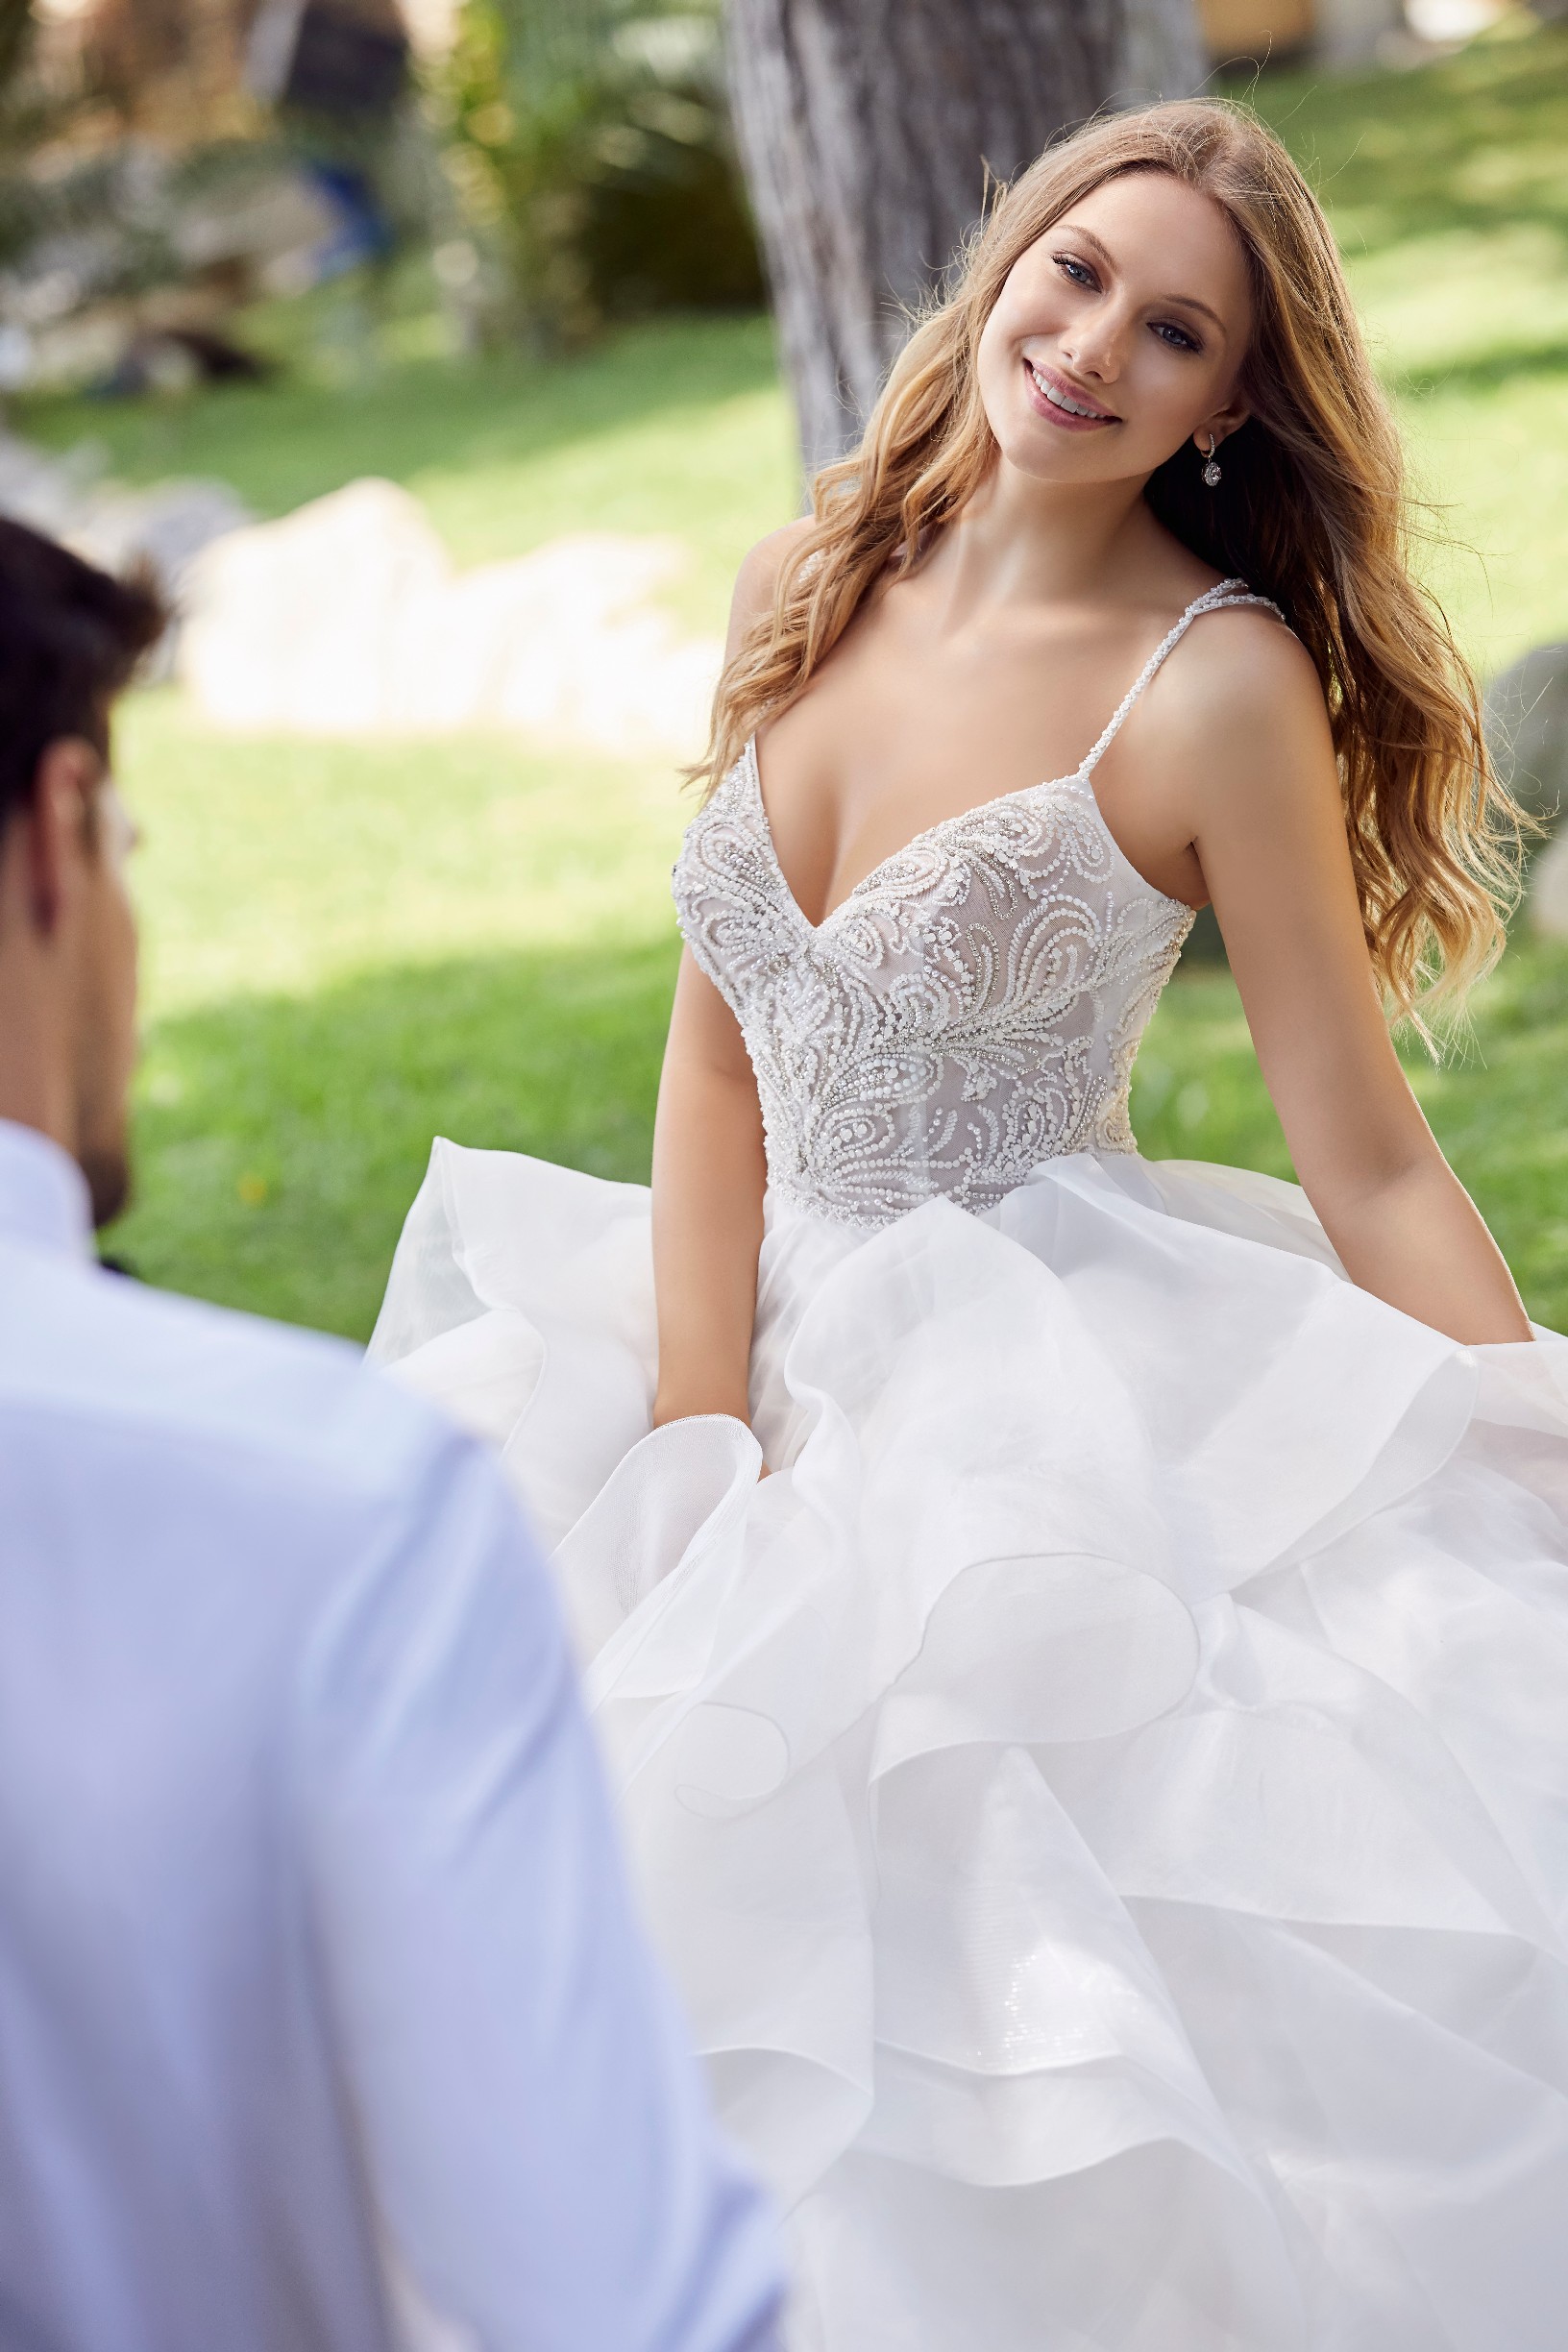 Blonde woman wearing heavily beaded bodice wedding dress with thin straps looking at man in shirt